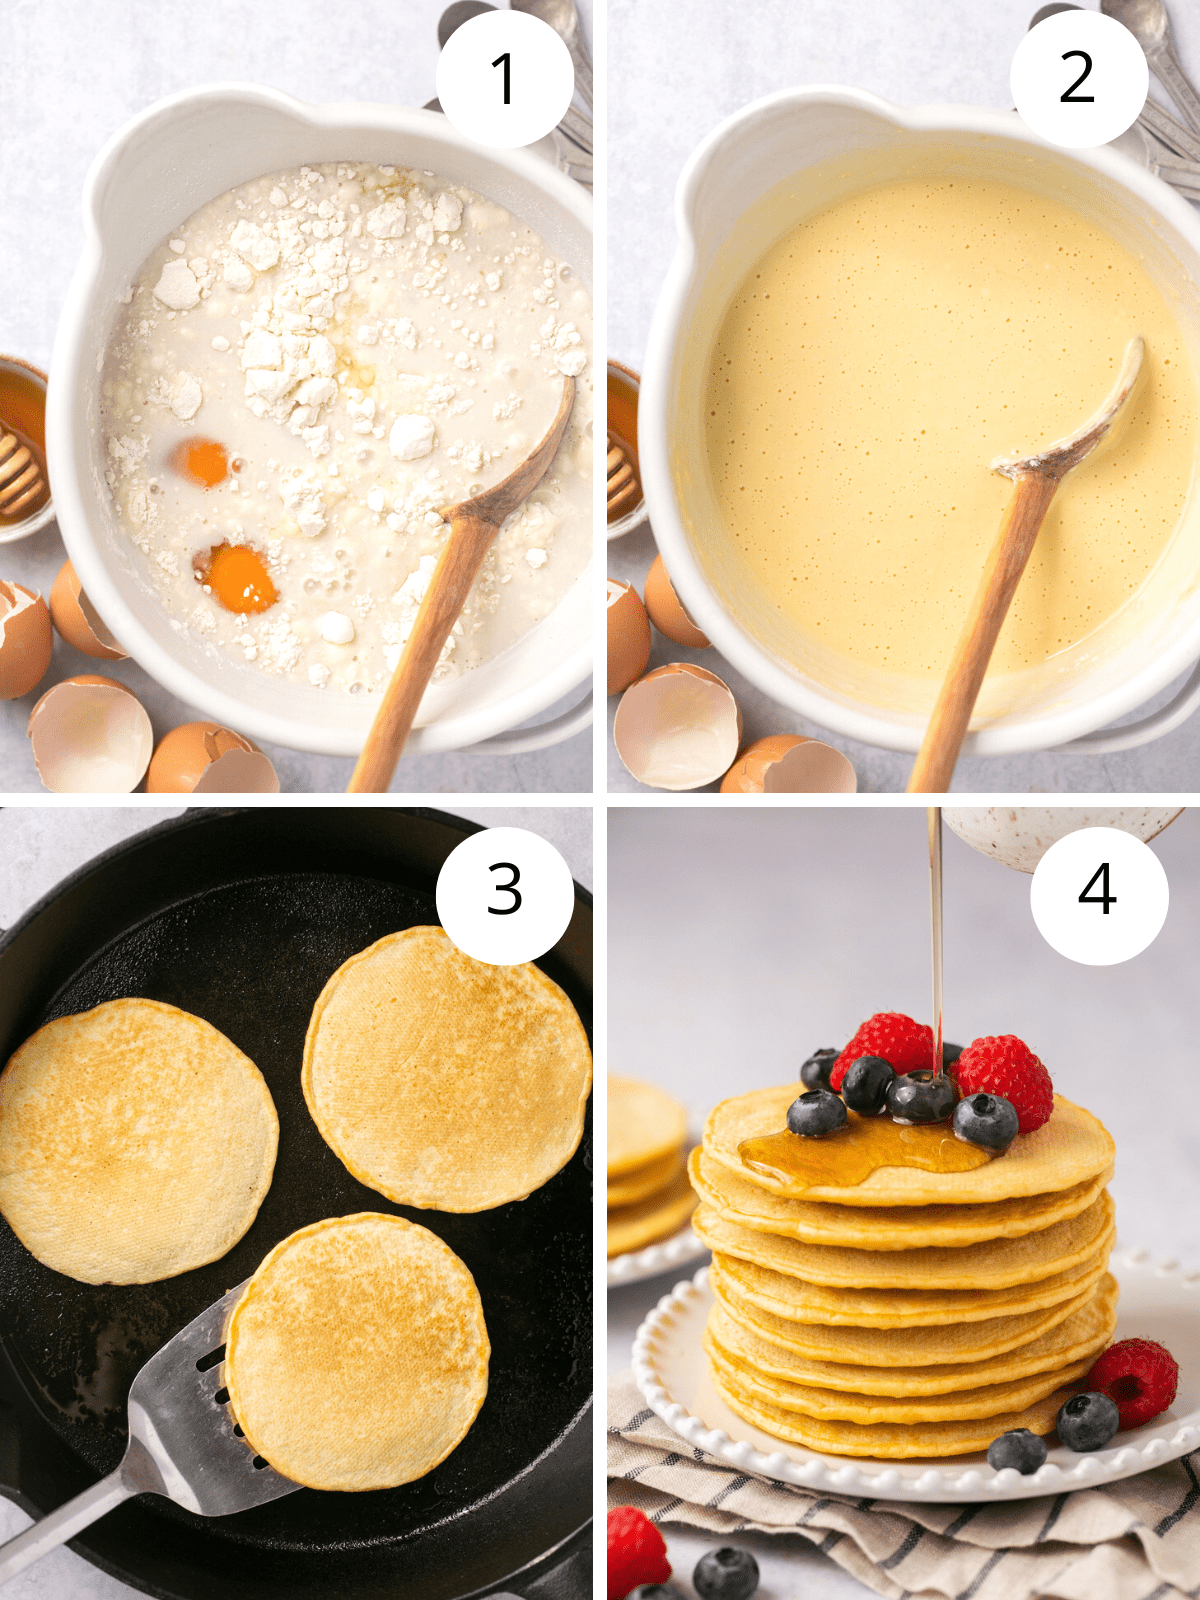 Step by step directions for making oat milk pancakes.